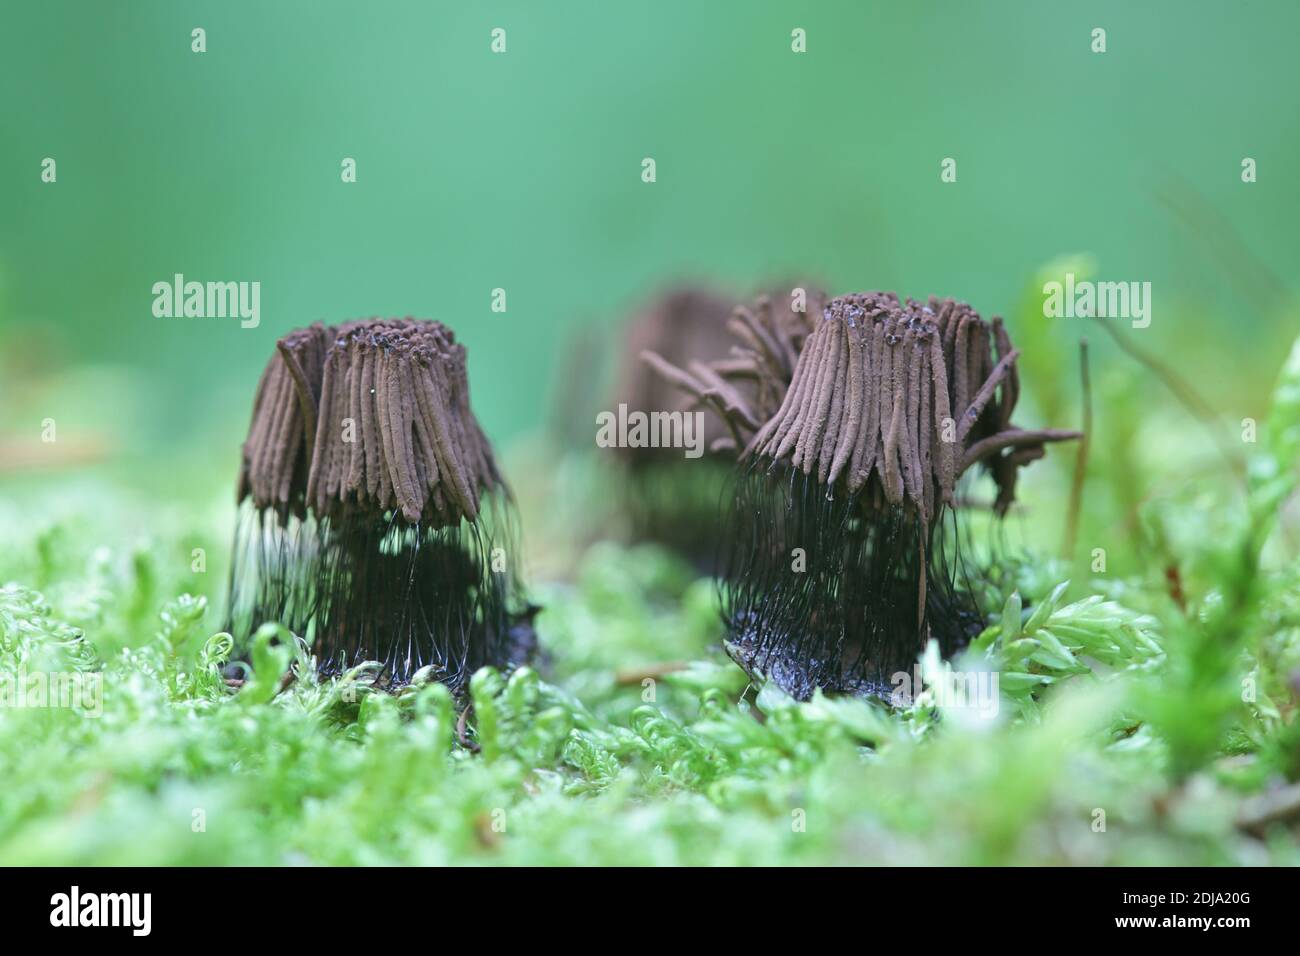 Stemonitis fusca, tube slime mold from Finland with no common english name Stock Photo